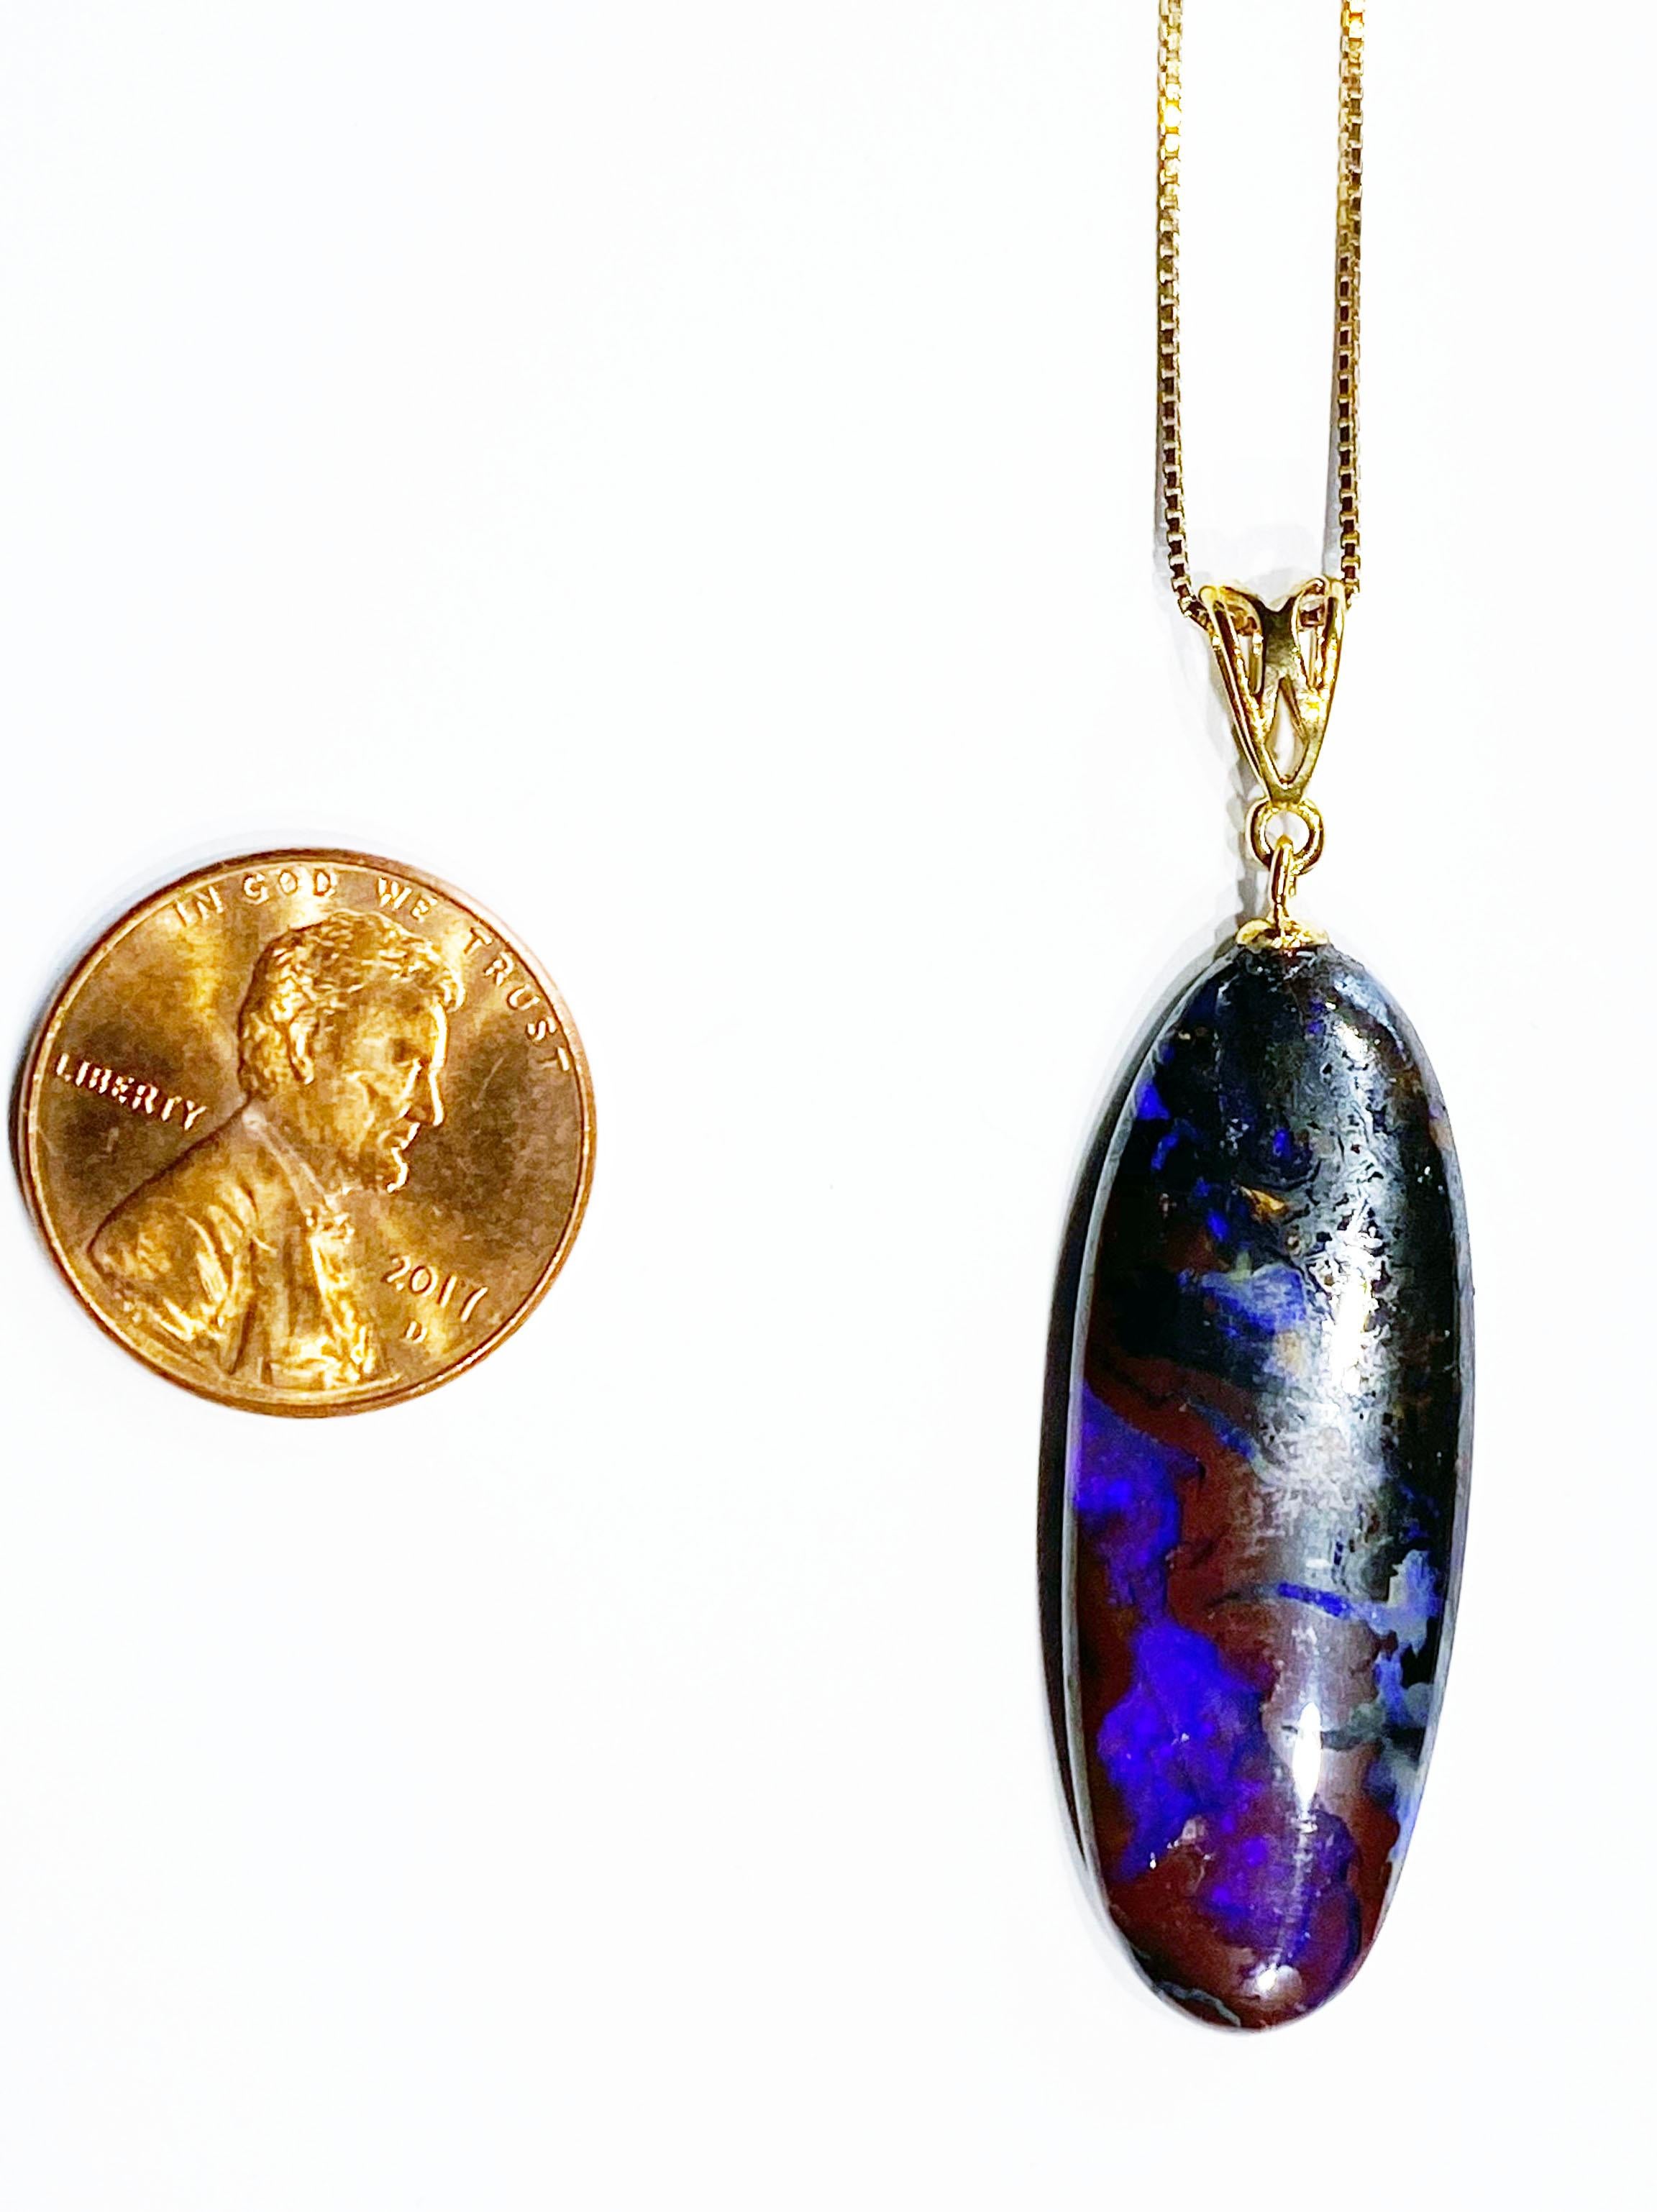 Cabochon Boulder Opal Pendant on a Gold Plated Silver Chain For Sale